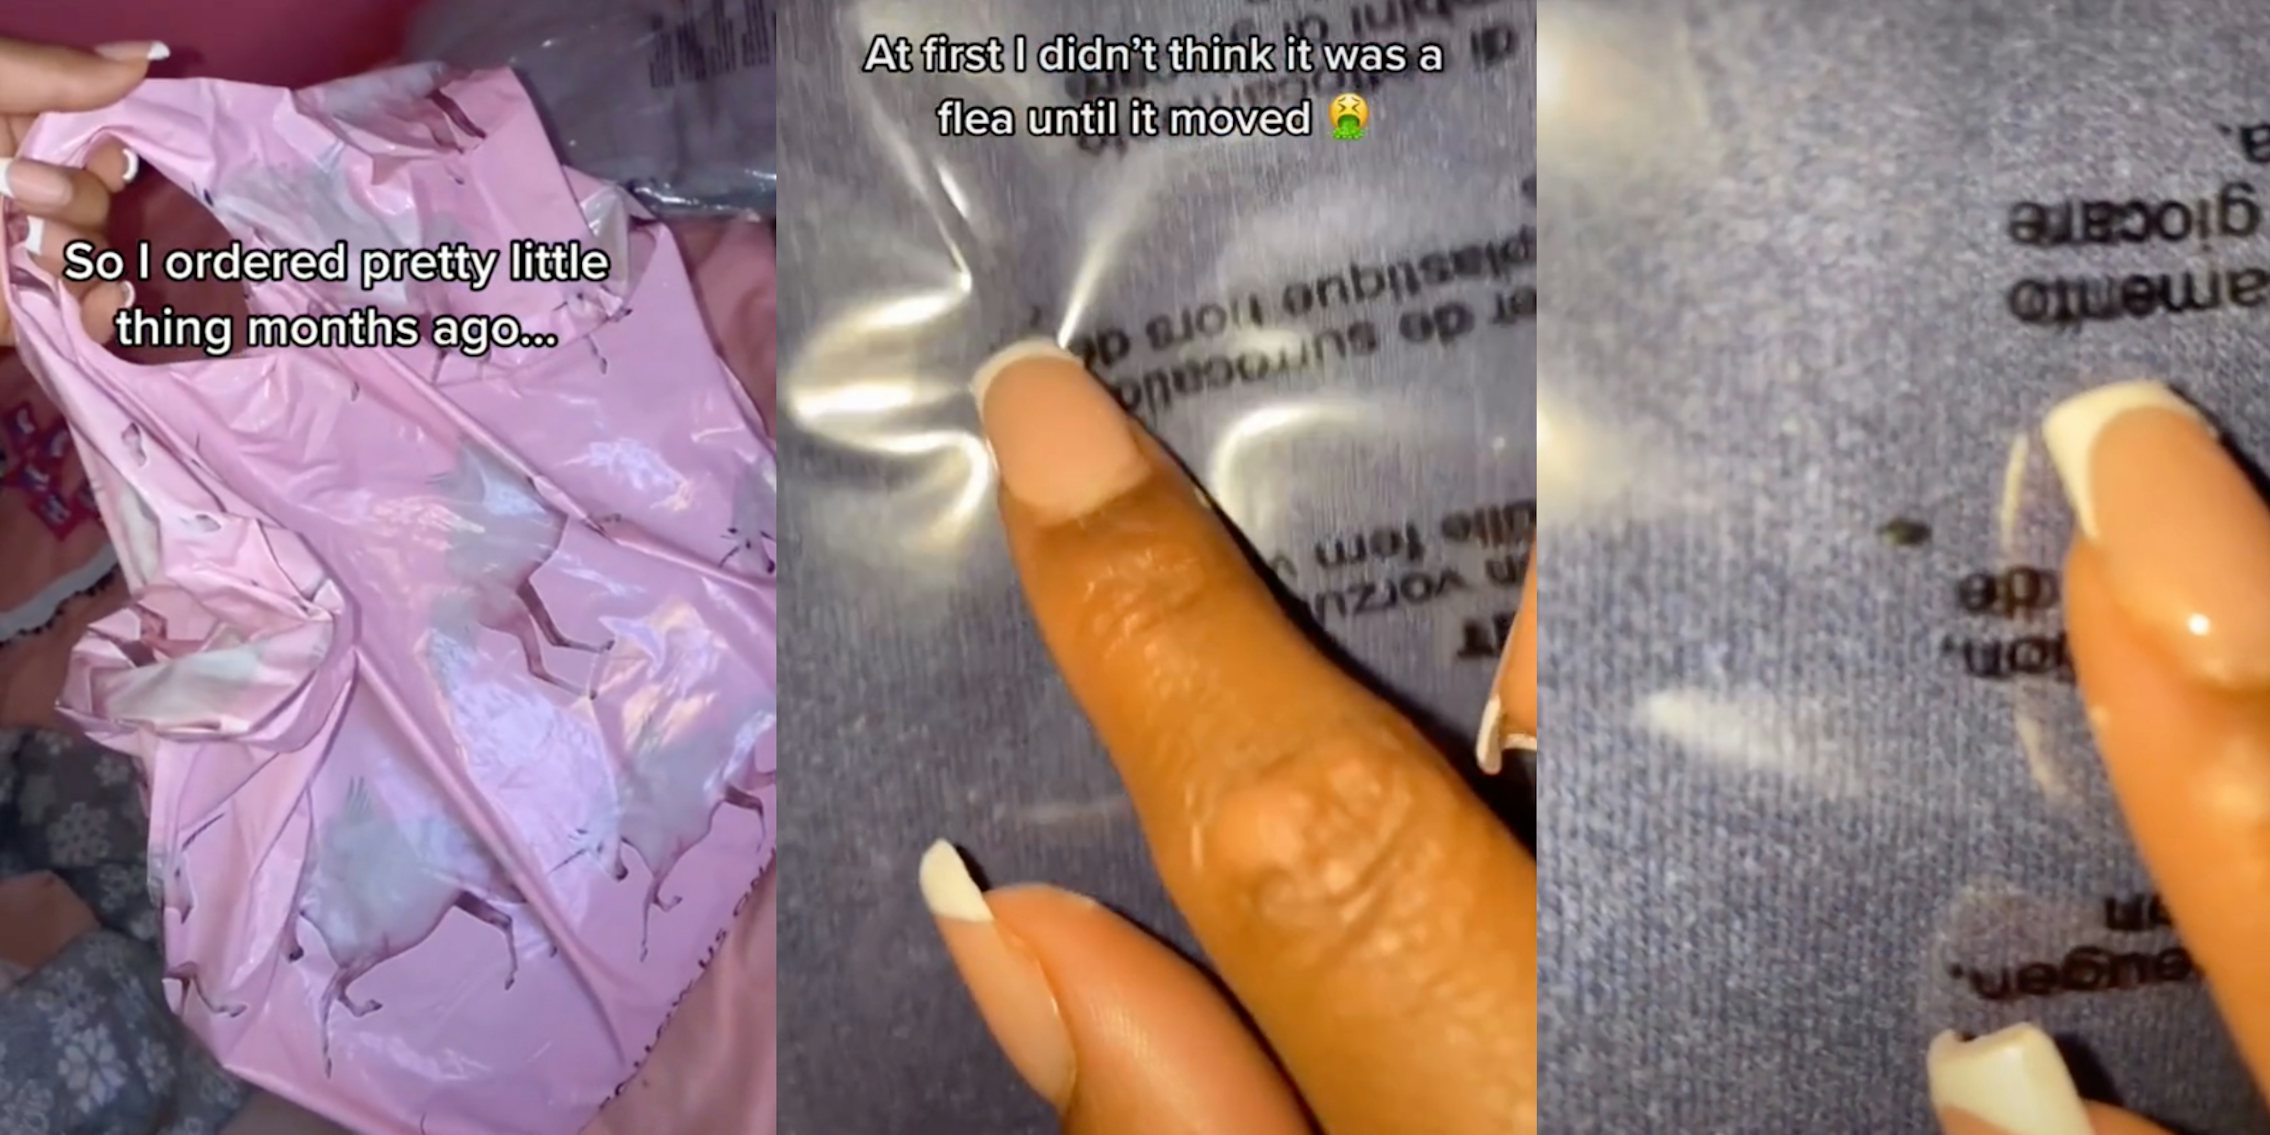 Woman discovers fleas in her Pretty Little Thing shipment